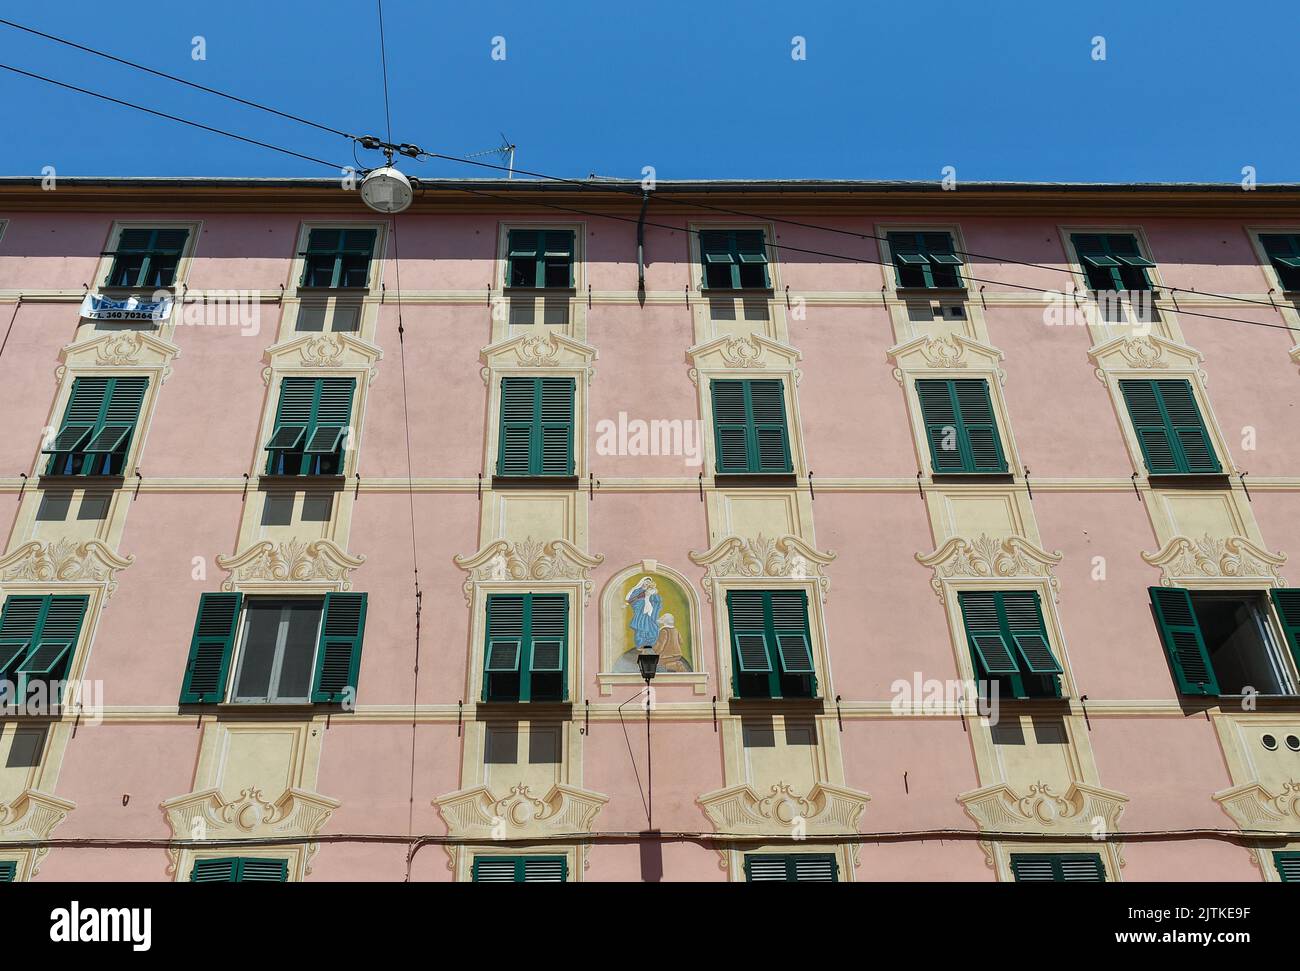 Façade of an old palace with a painted shrine of Our Lady of Montallegro and trompe l'oeil decorations, Nervi, Genoa, Liguria, Italy Stock Photo